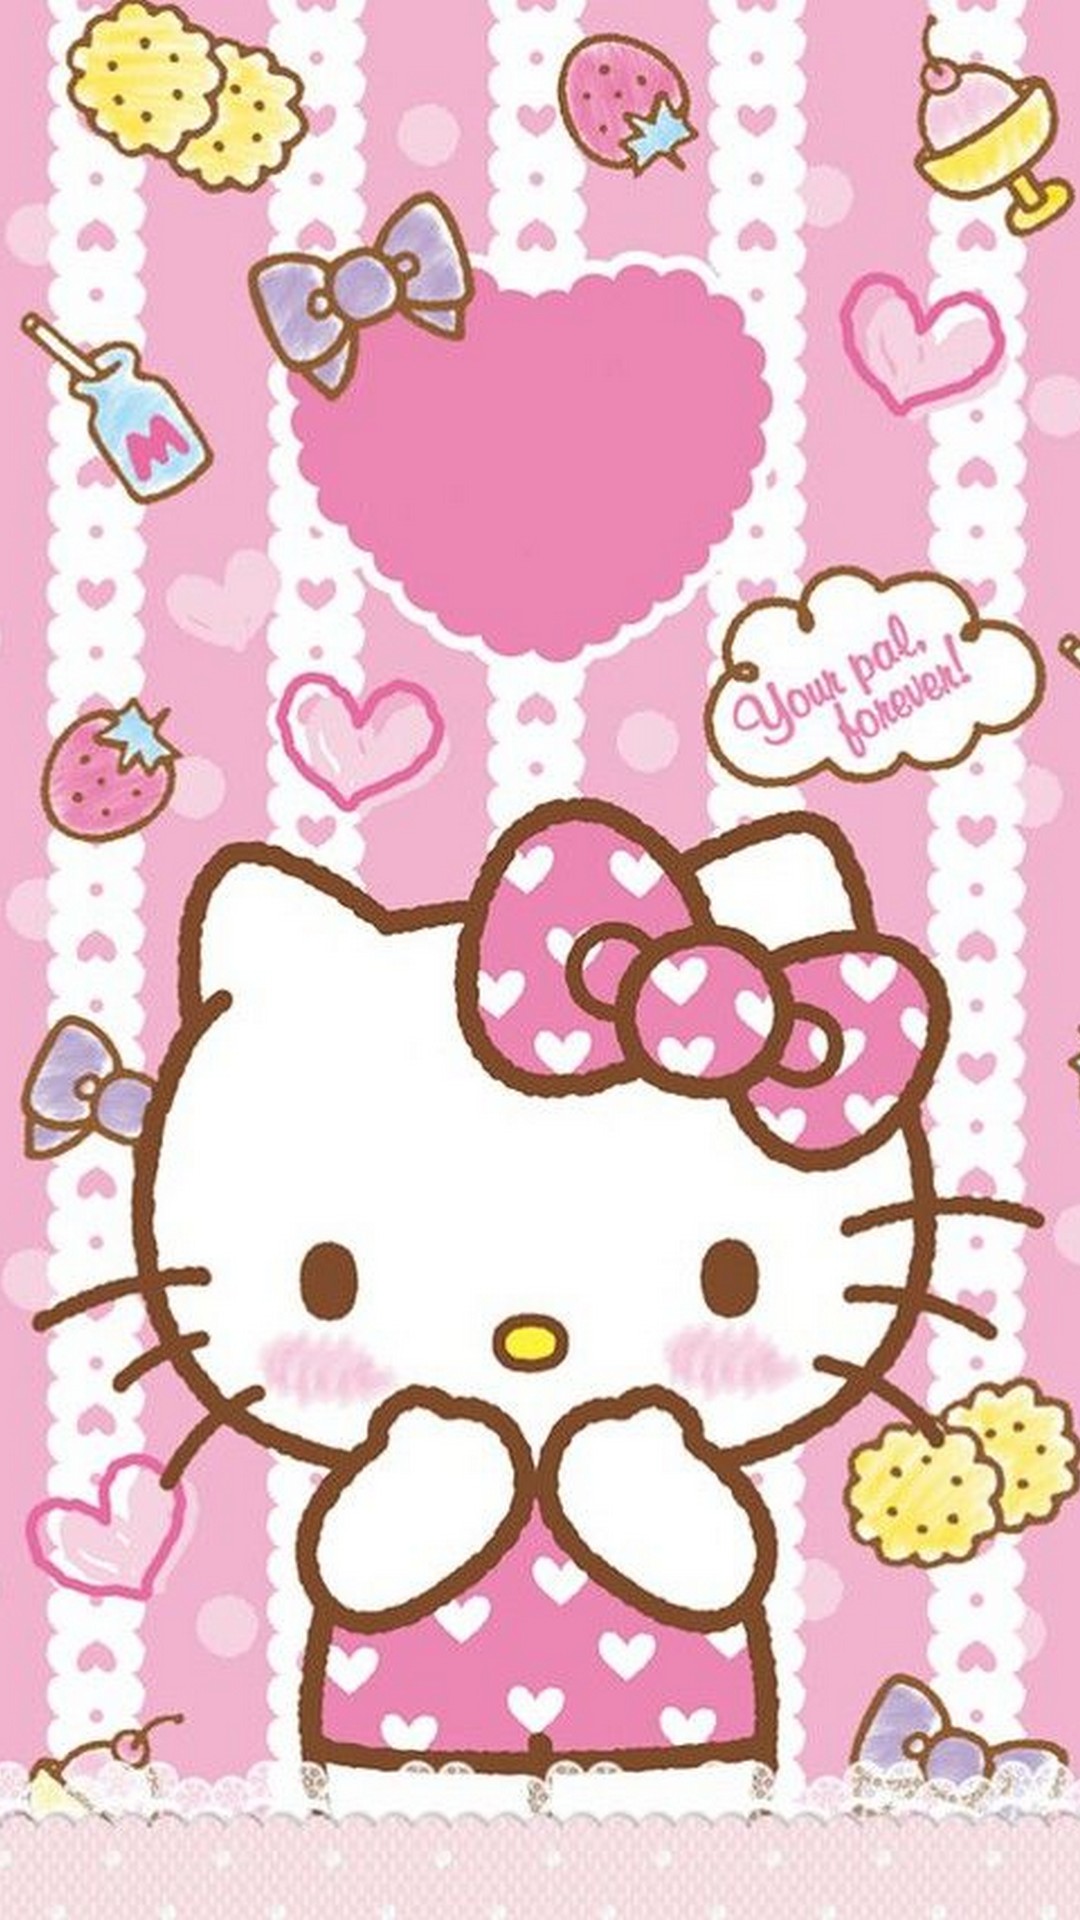 Free Download Start Download Hello Kitty Pink Wallpaper Android Wallpaper 1080x19 For Your Desktop Mobile Tablet Explore 50 Hellokitty Wallpapers Cute Hello Kitty Wallpapers Hello Kitty Pictures Wallpaper Purple